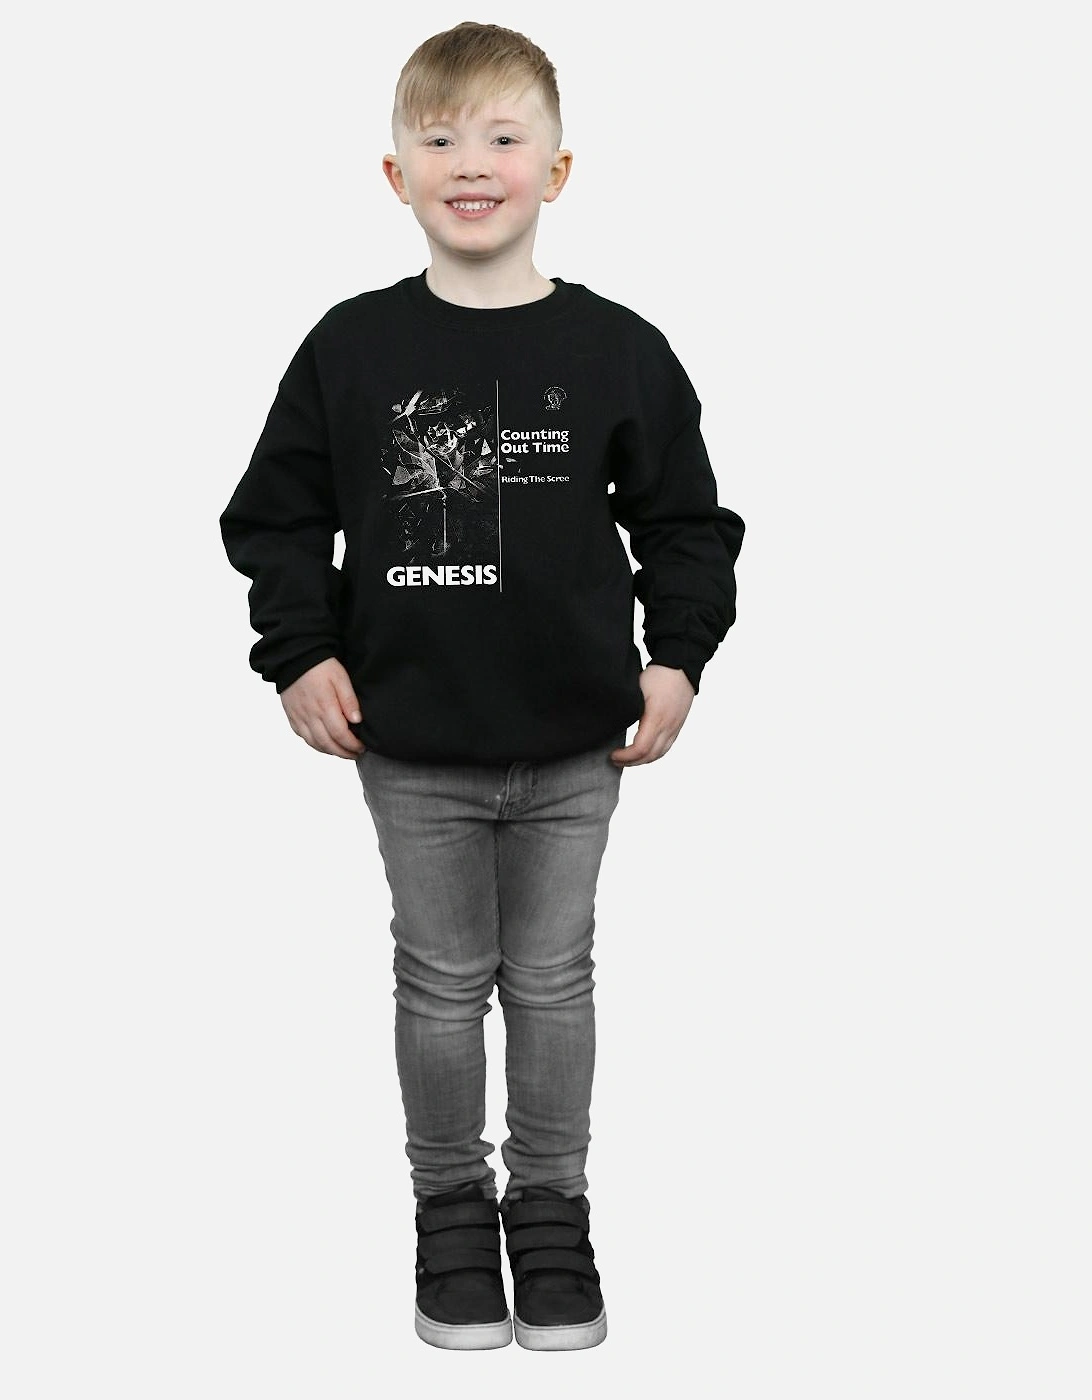 Boys Counting Out Time Sweatshirt